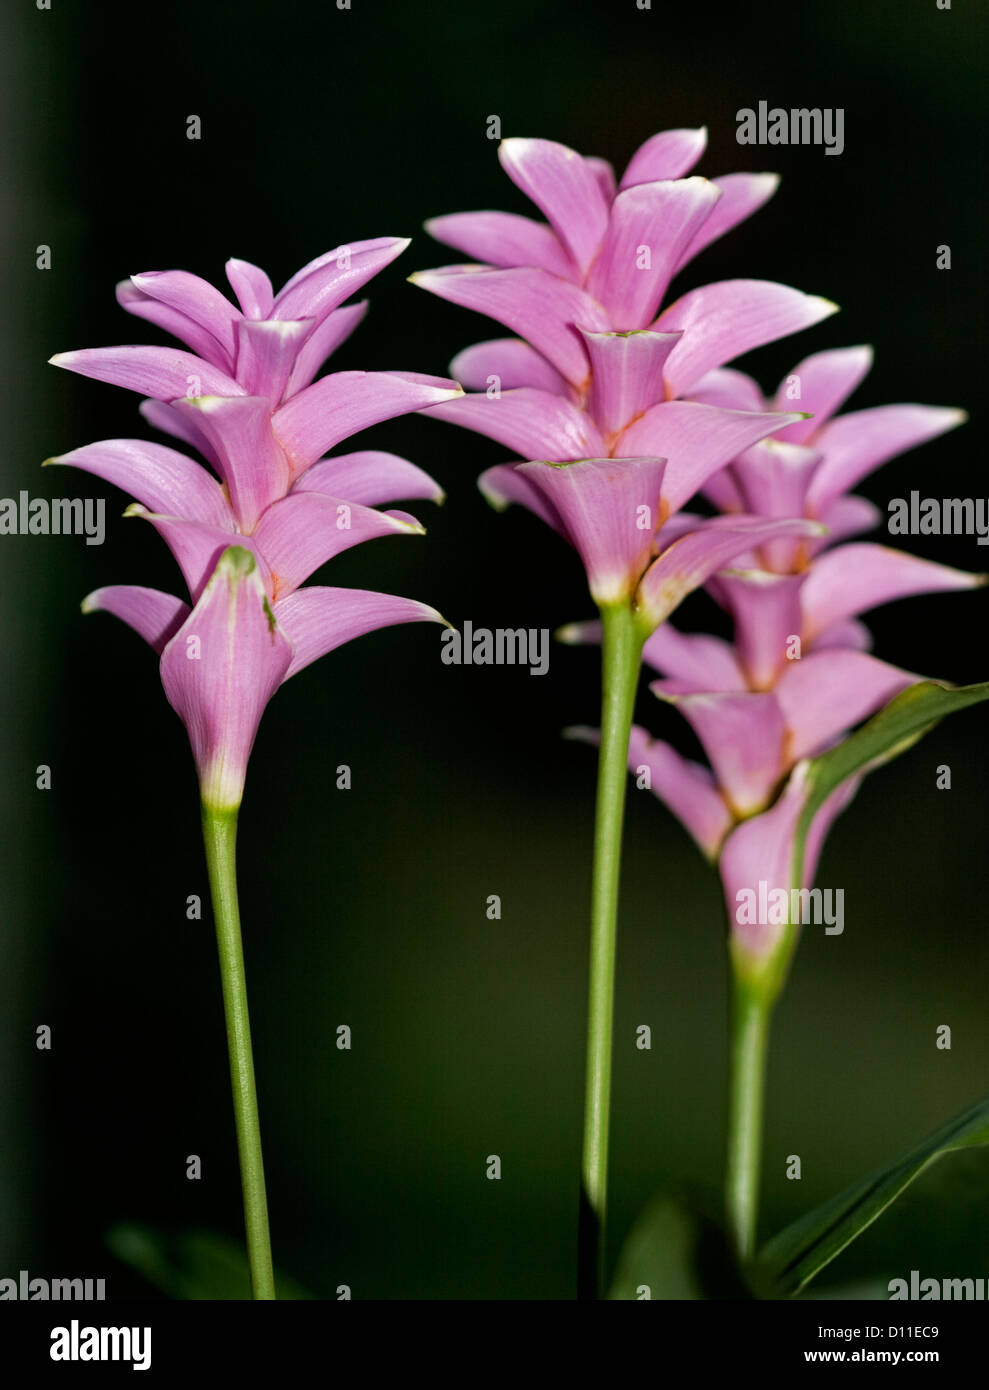 Group of flower spikes of Curcuma sparganifolia 'Pink Pearl', ornamental ginger - a tropical flowering plant on dark background Stock Photo